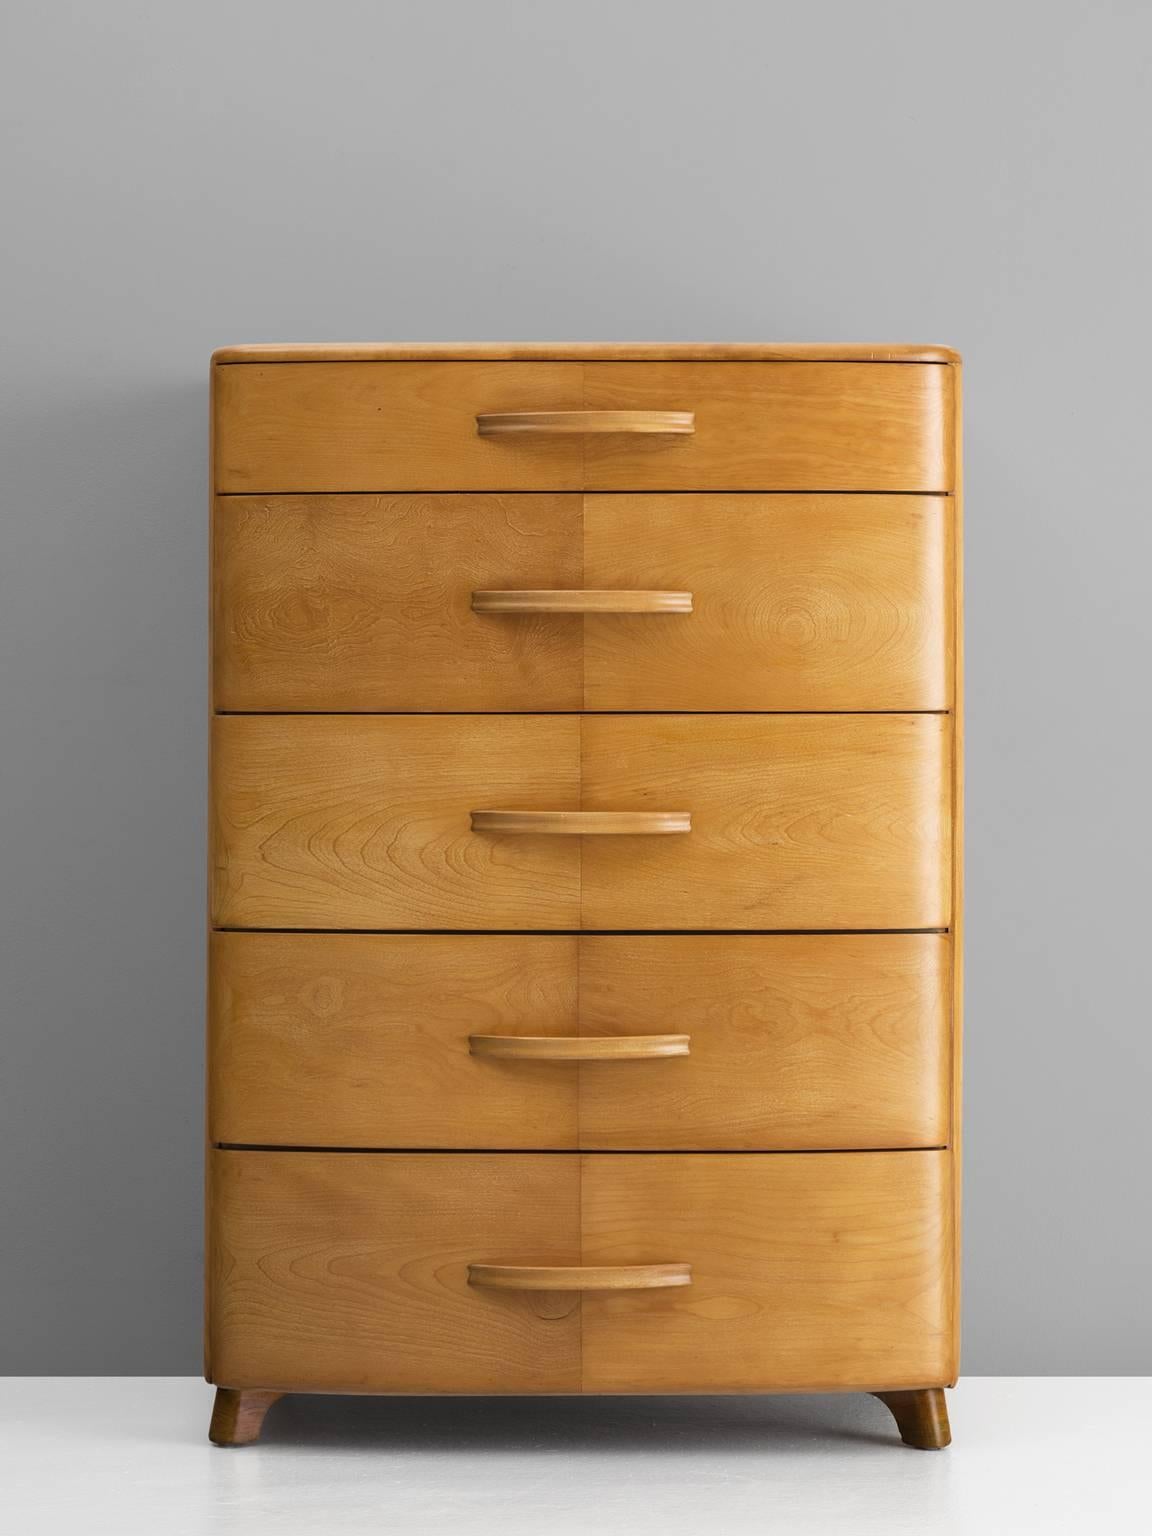 Dresser in maple, France, 1940s.

Late Art Deco cabinet with five drawers in blond maple wood. This chest of drawers has a basic design which leads all attention to the material and natural expression of this cabinet. Four small legs lift the